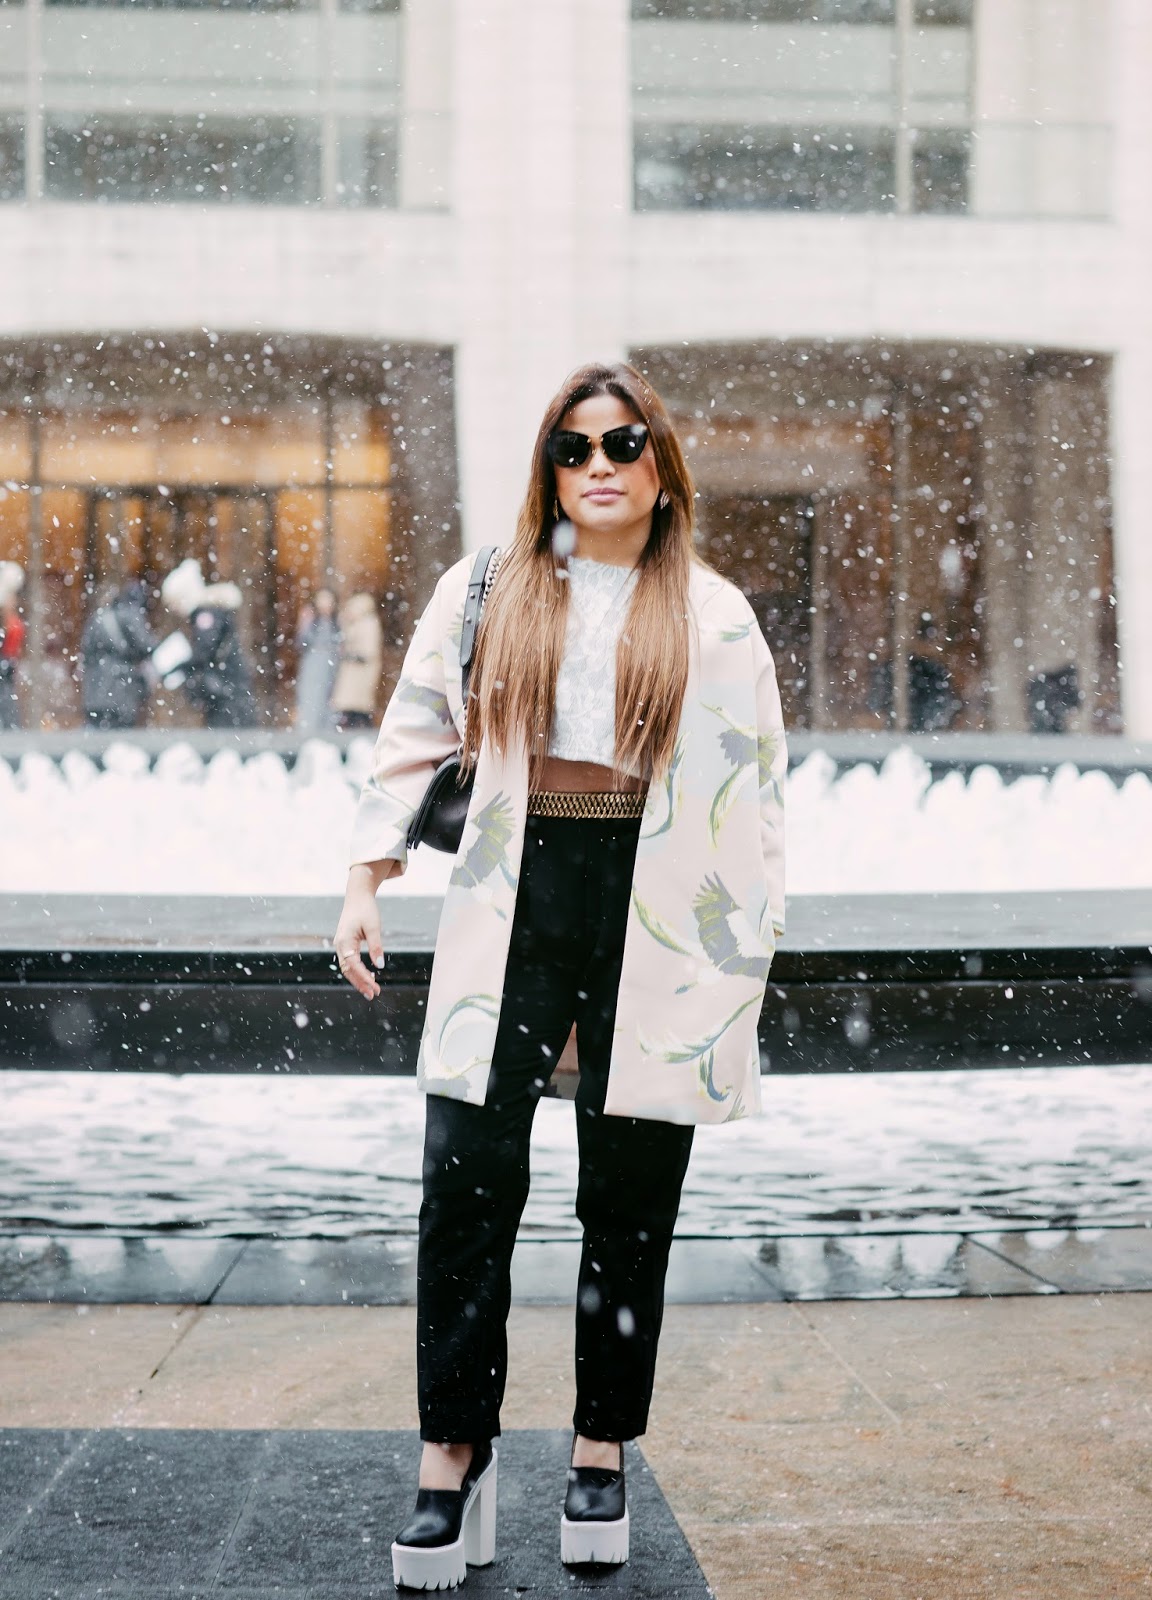 NYFW Day 2: Lincoln Center Street Style - The Bobbed Brunette